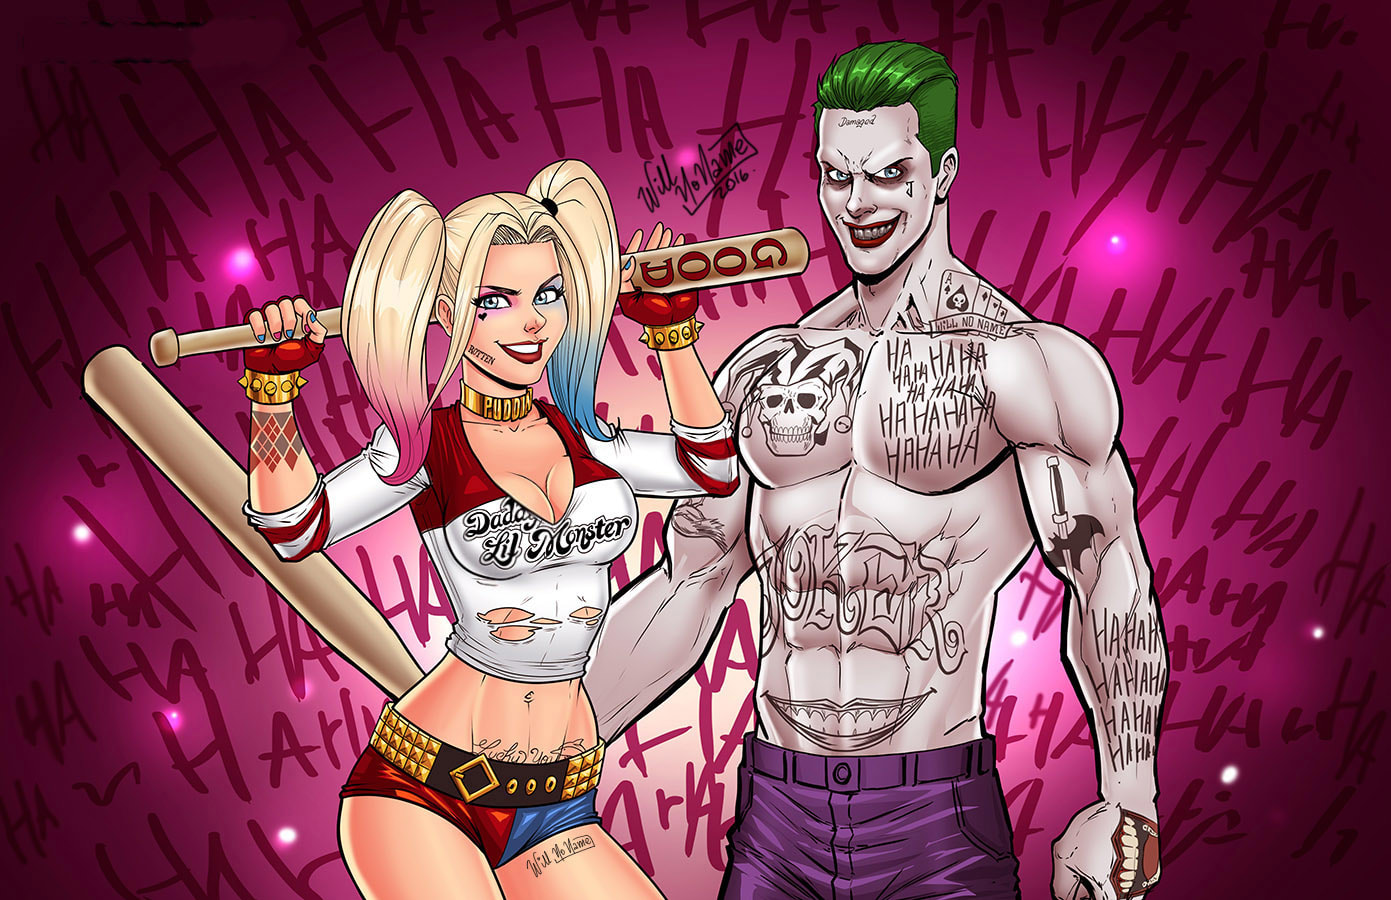 Draw You As Harley Quinn Or The Joker By Willnoname